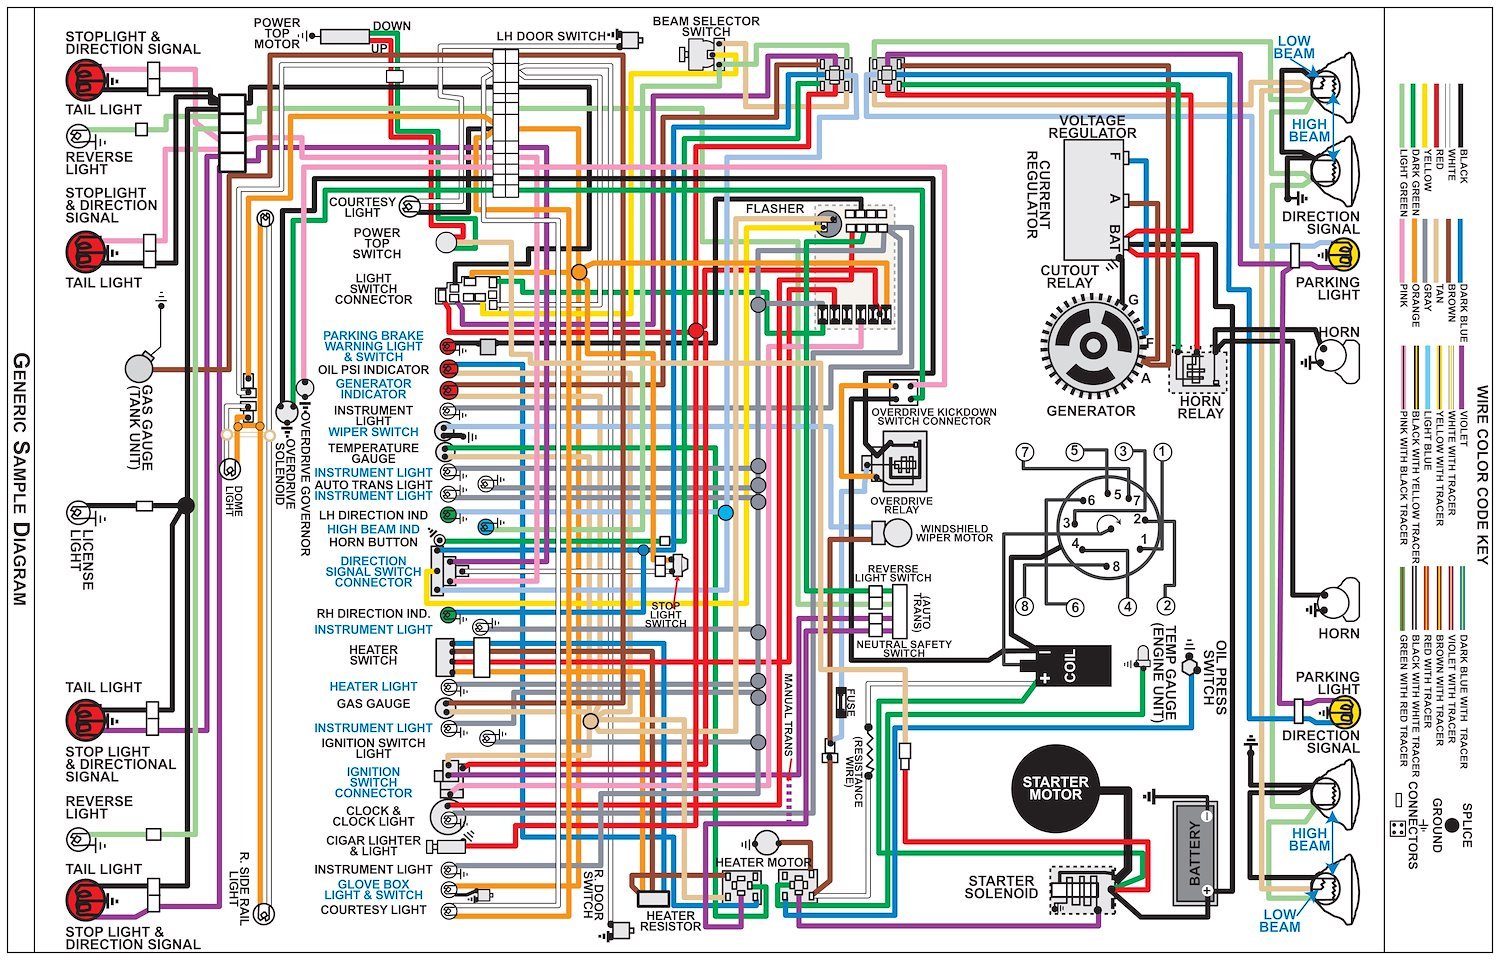 Wiring Diagram for 1972 Ford Mustang, 11 in x 17 in., Laminated